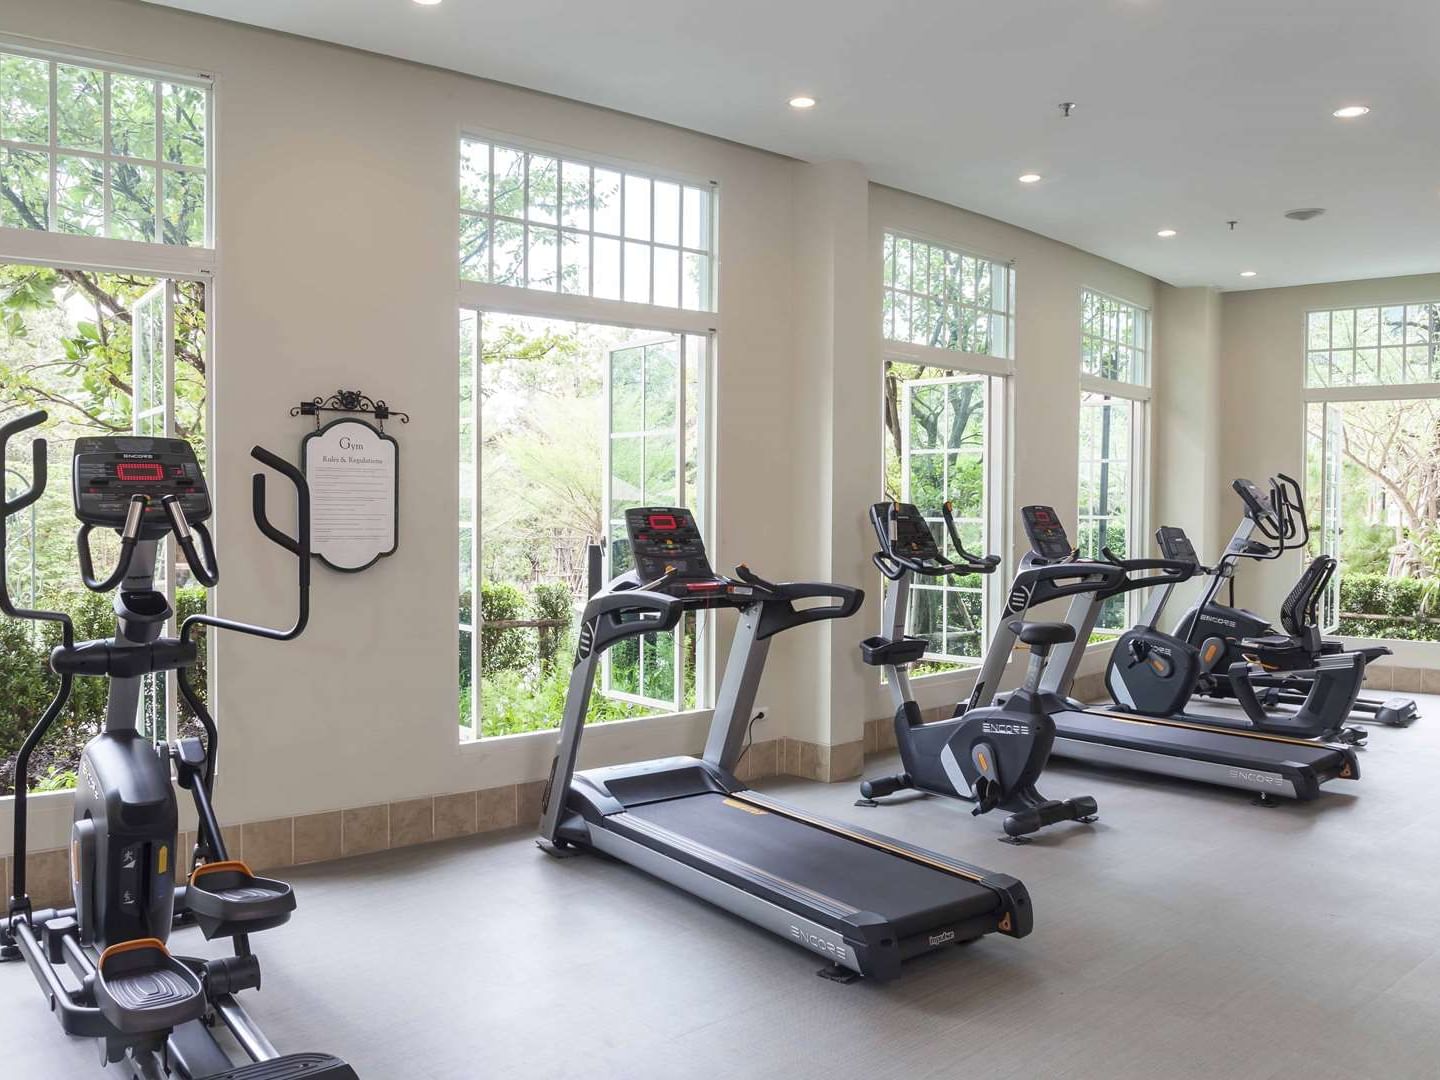 Treadmills in Gym with garden view at U Hotels and Resorts